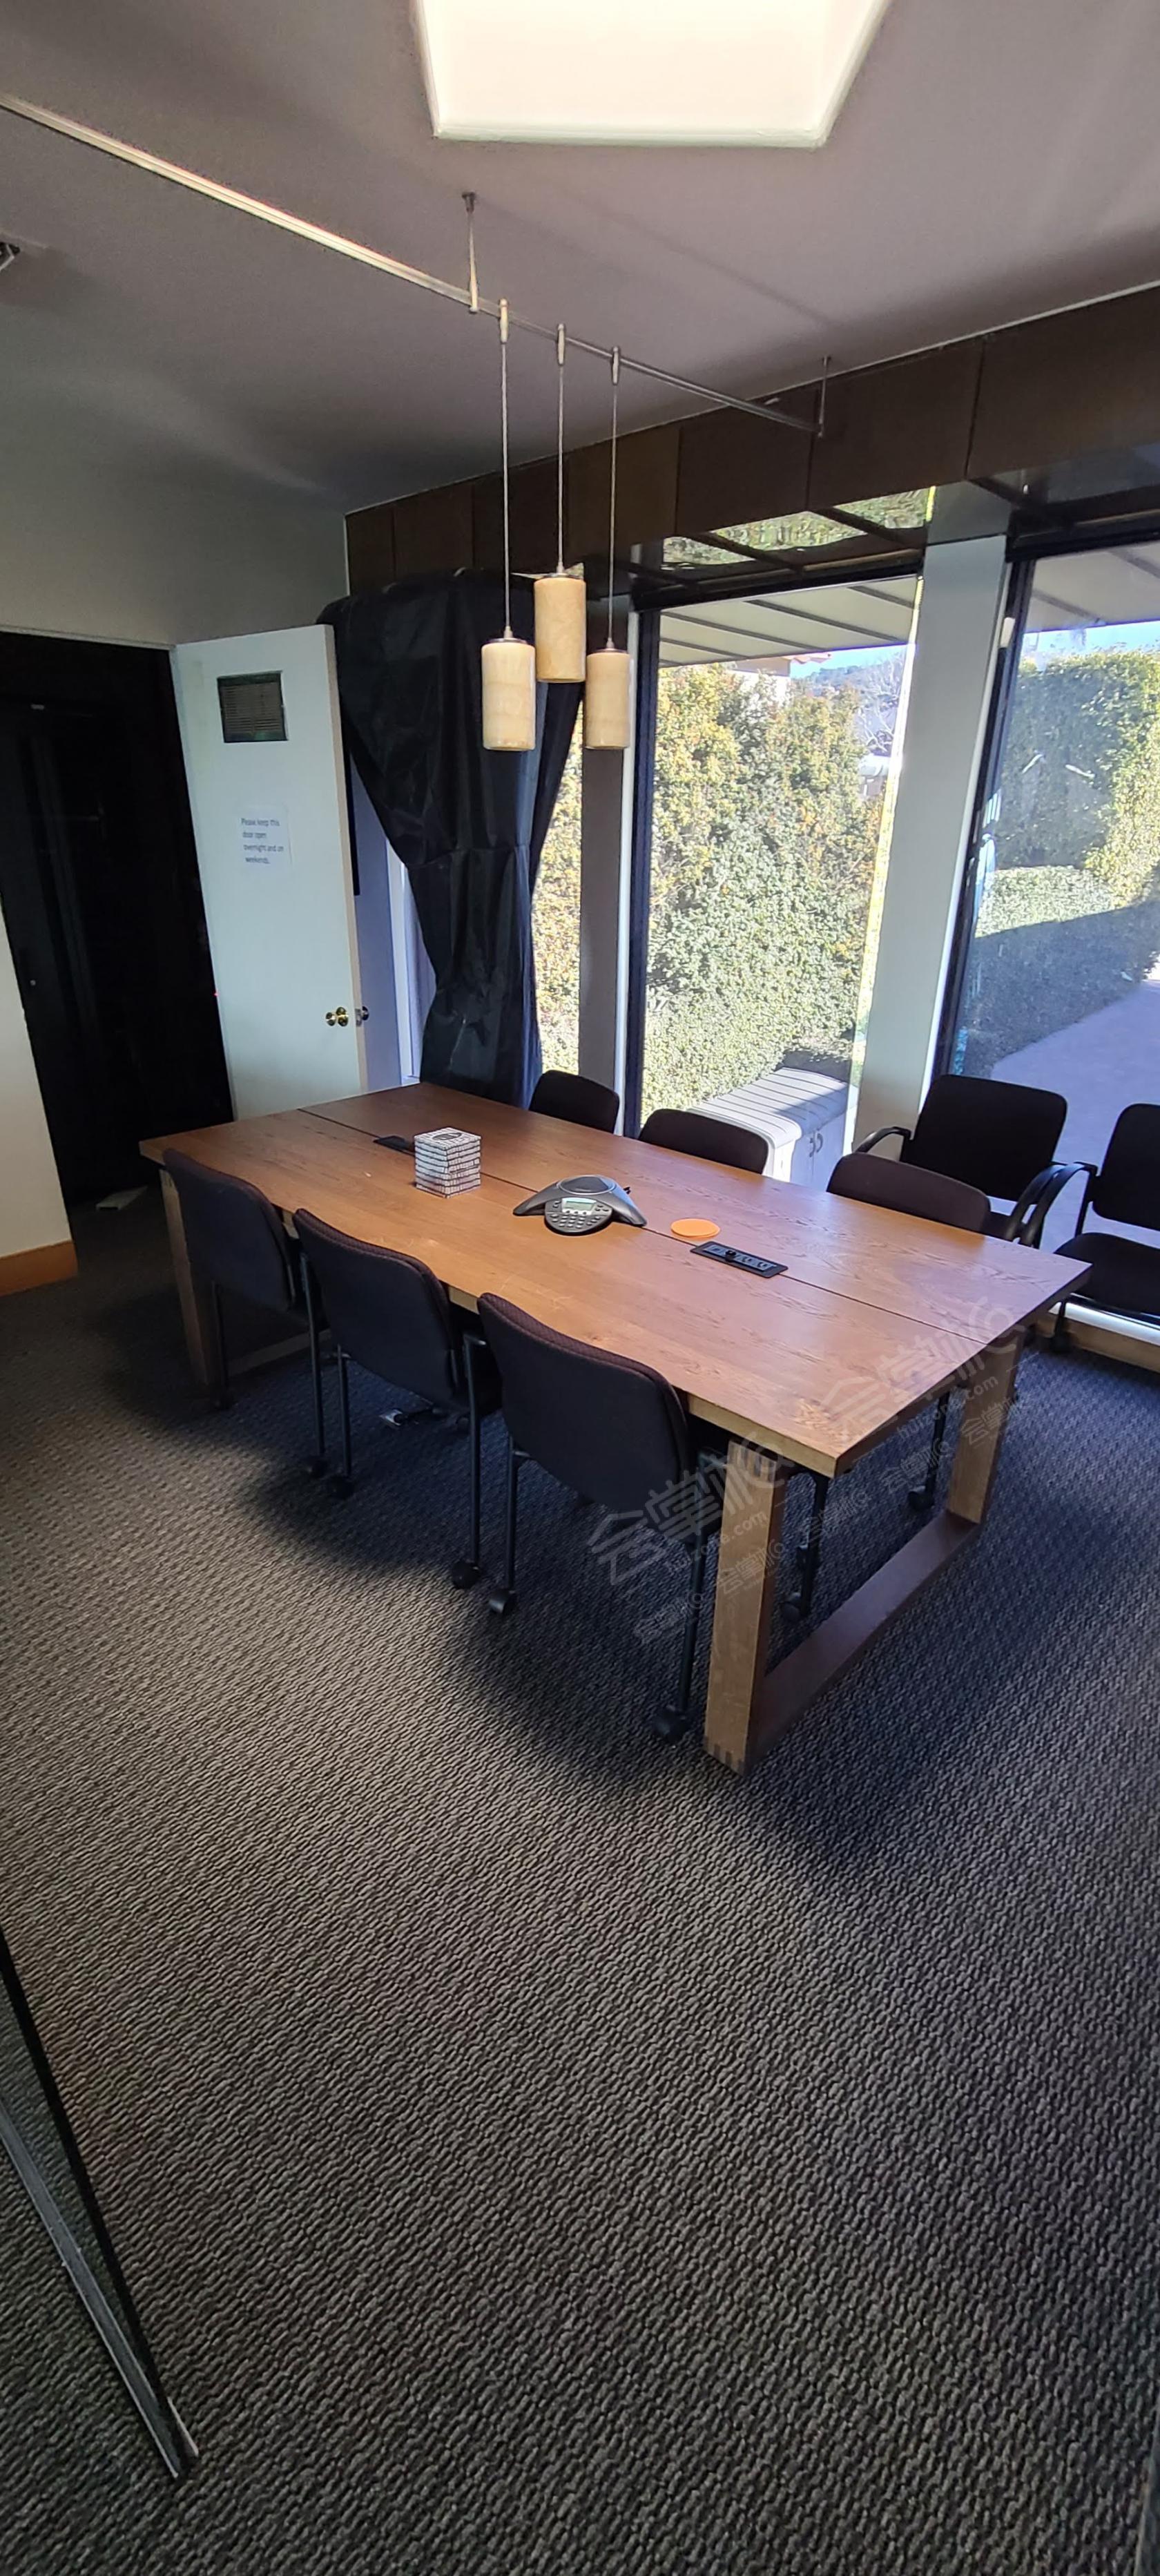 Meeting/Conference room space